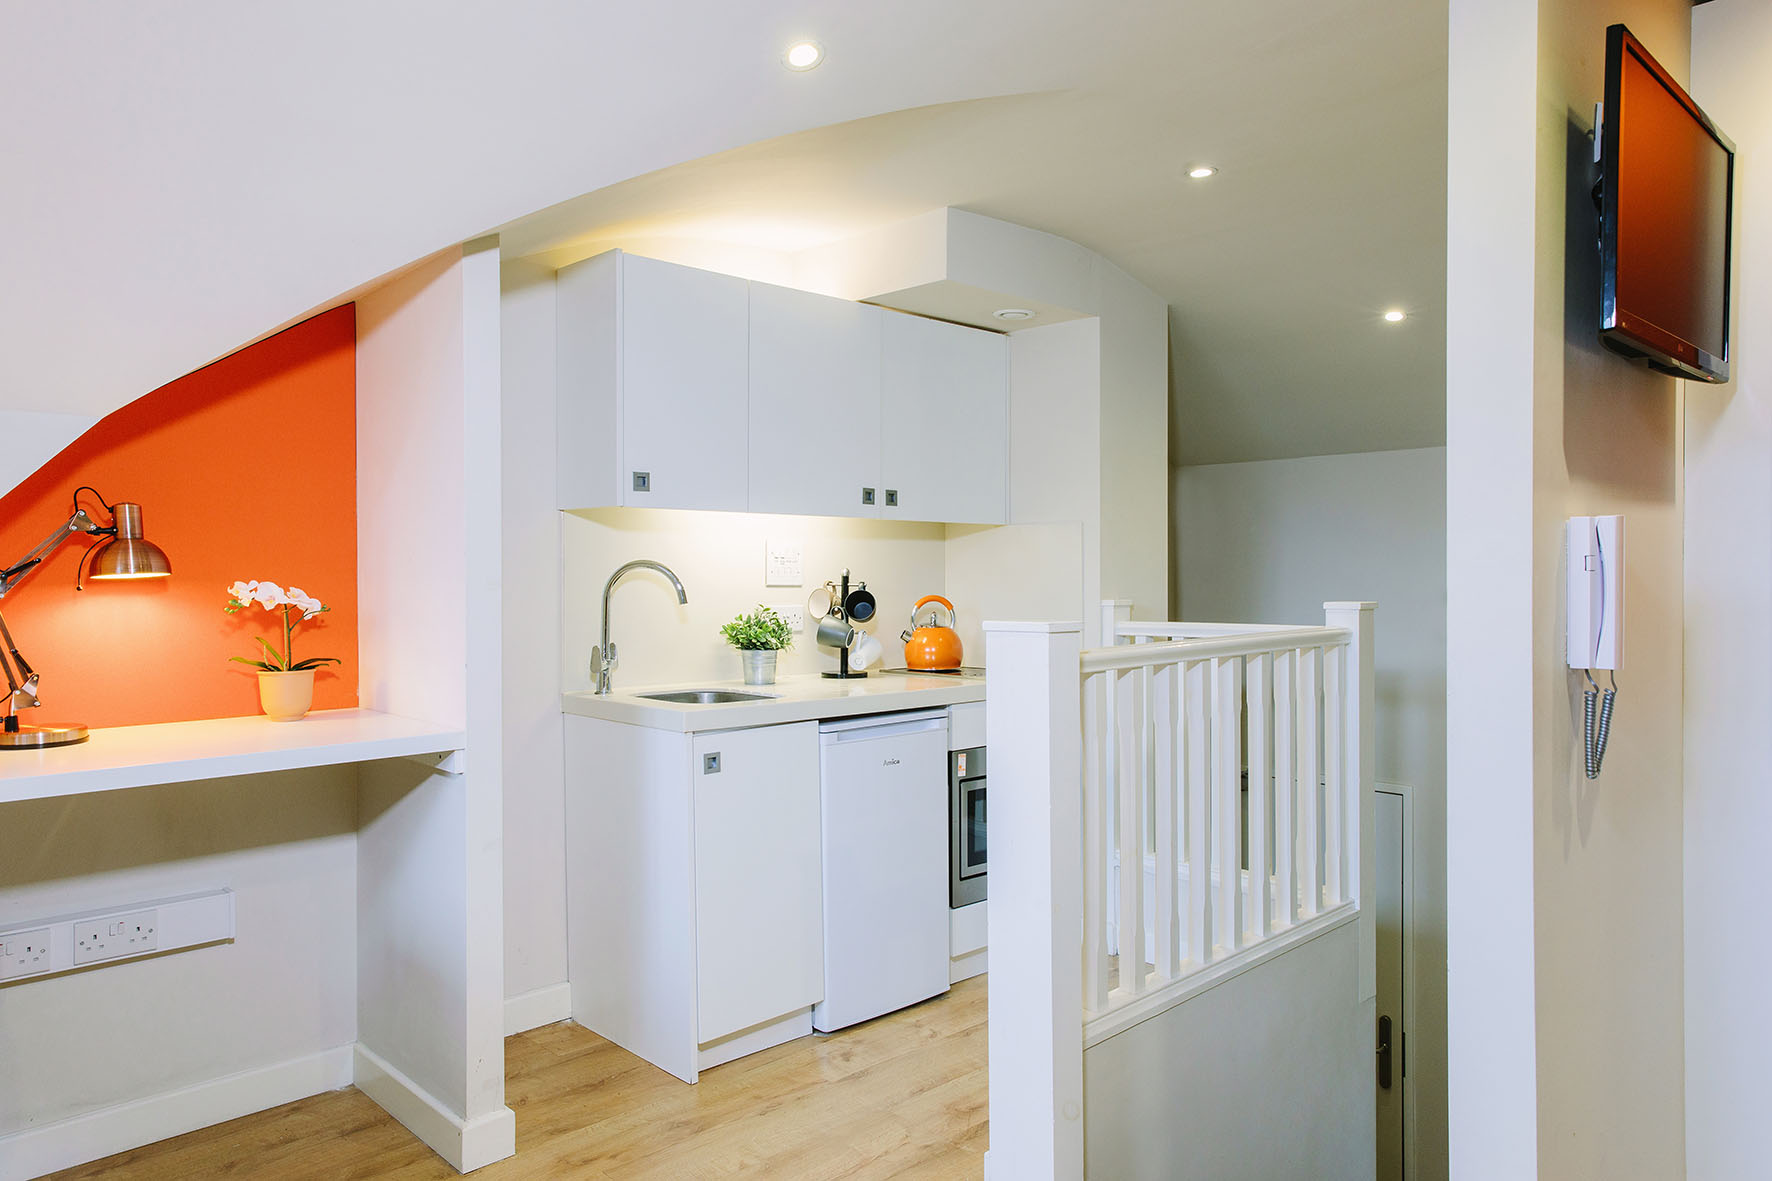 Kitchen in a Premium Range 1 Studio room at Cathedral Park in Bristol, Unite Students accommodation